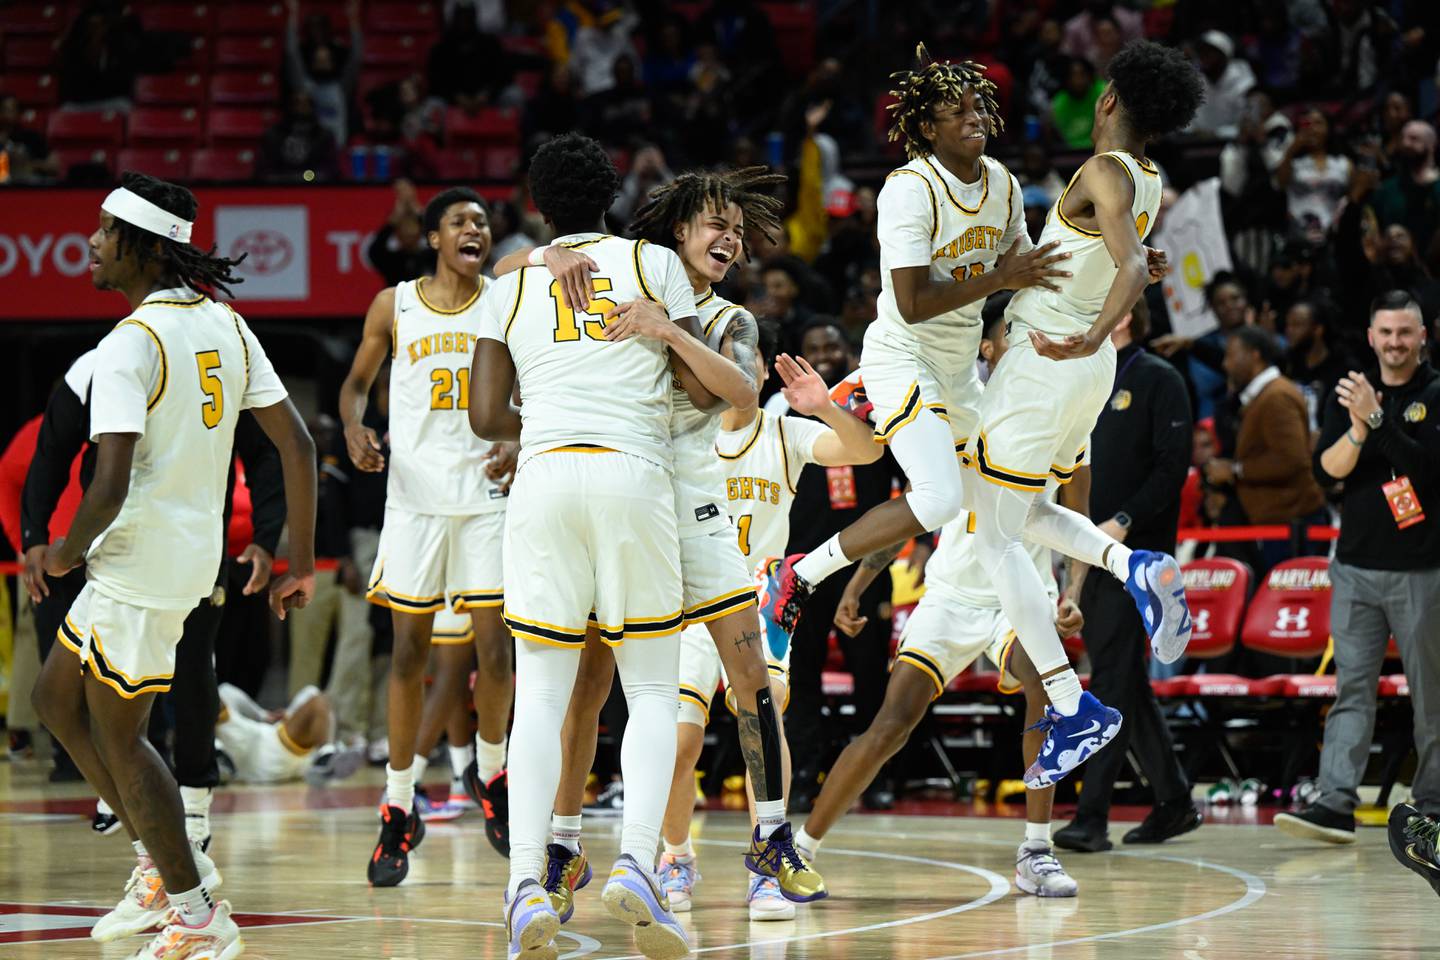 Parkville Knights players celebrate winning the MPSSAA 4A Boys state basketball final against the Meade Mustangs, Saturday, March 11, 2023, in College Park.